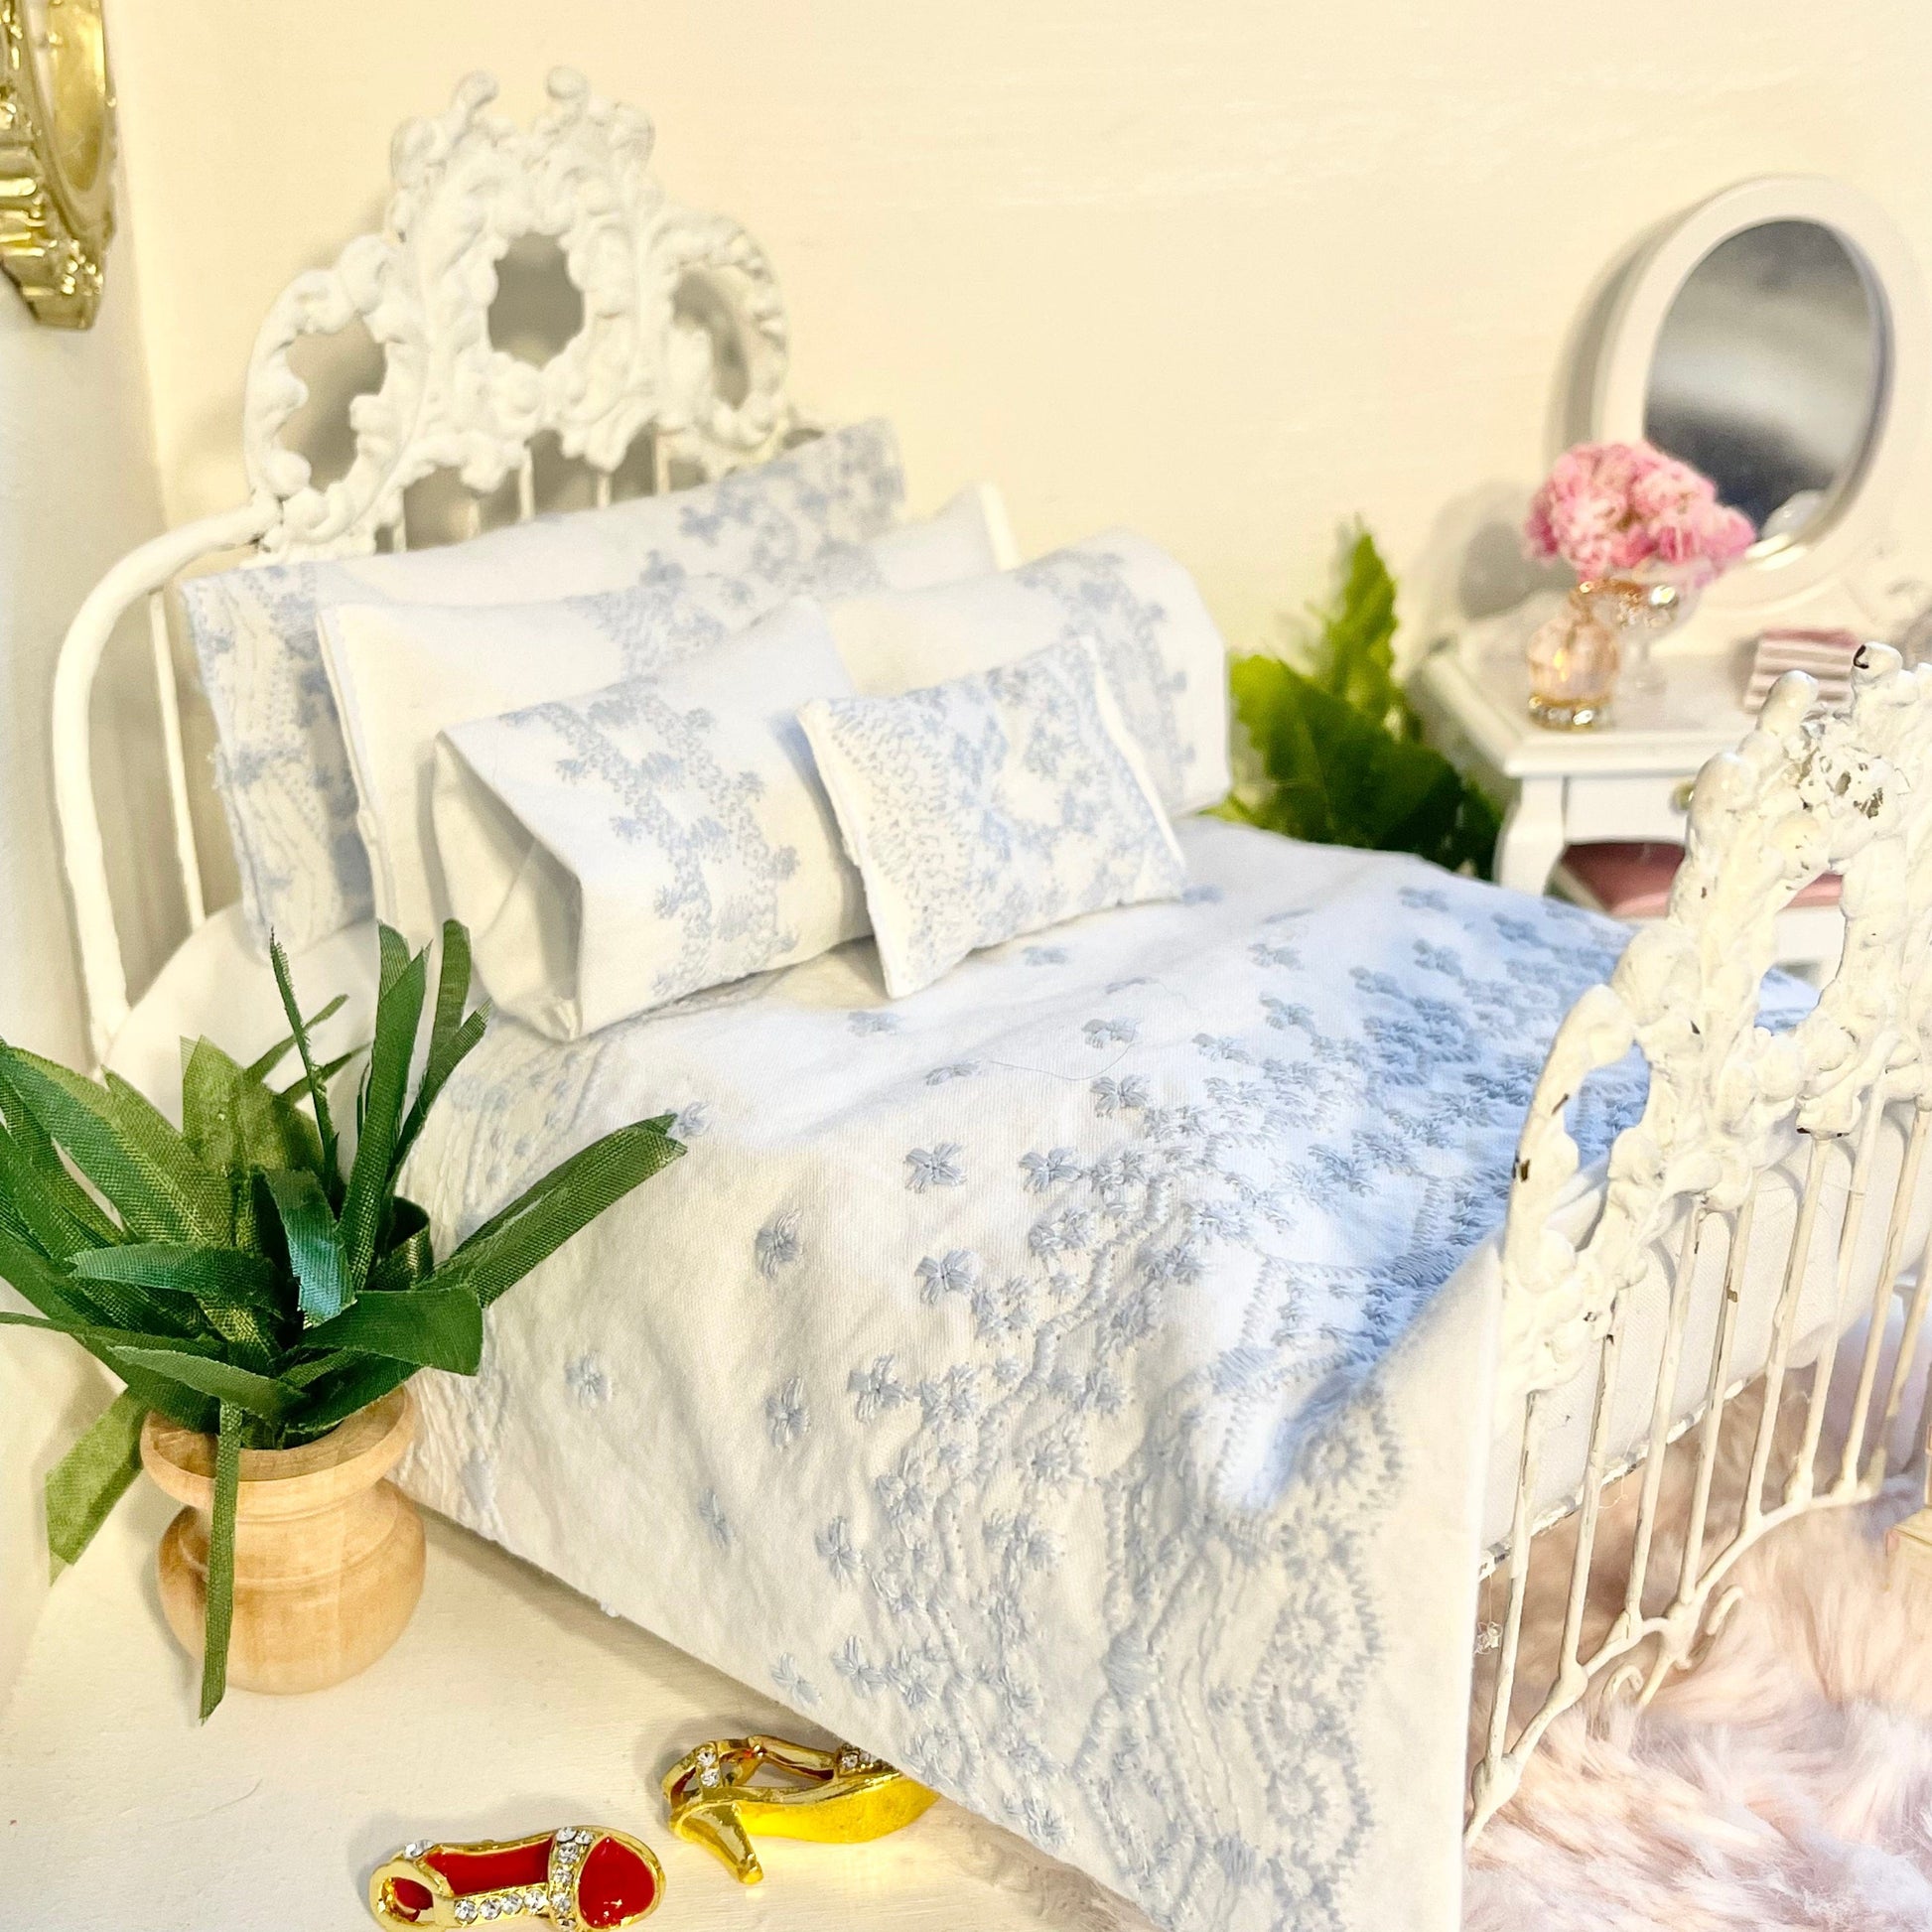 Chantallena Shabby Bed Linens Single Bedding Set Shabby Cottage- Six Piece Shabby Pale Blue Embroidered Bedding Set